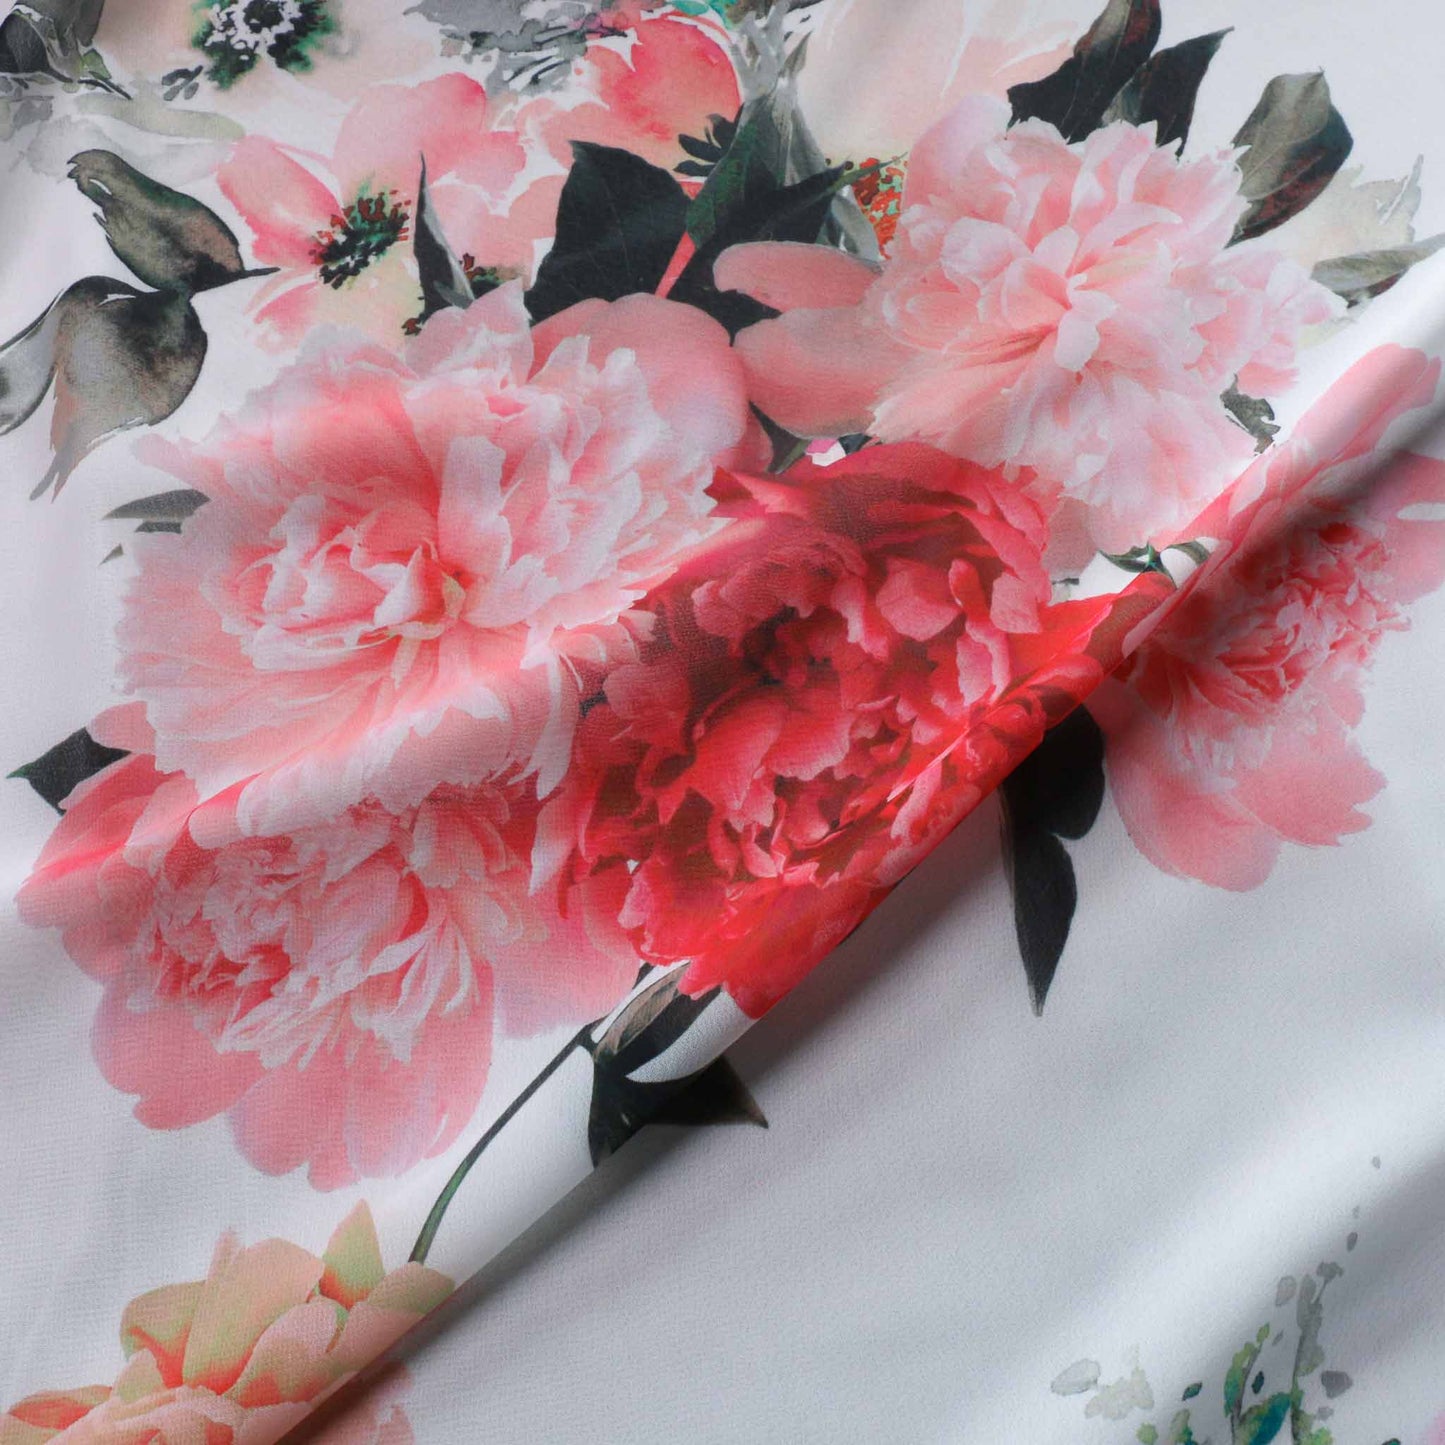 red and pink flowers printed on white chiffon dressmaking fabric